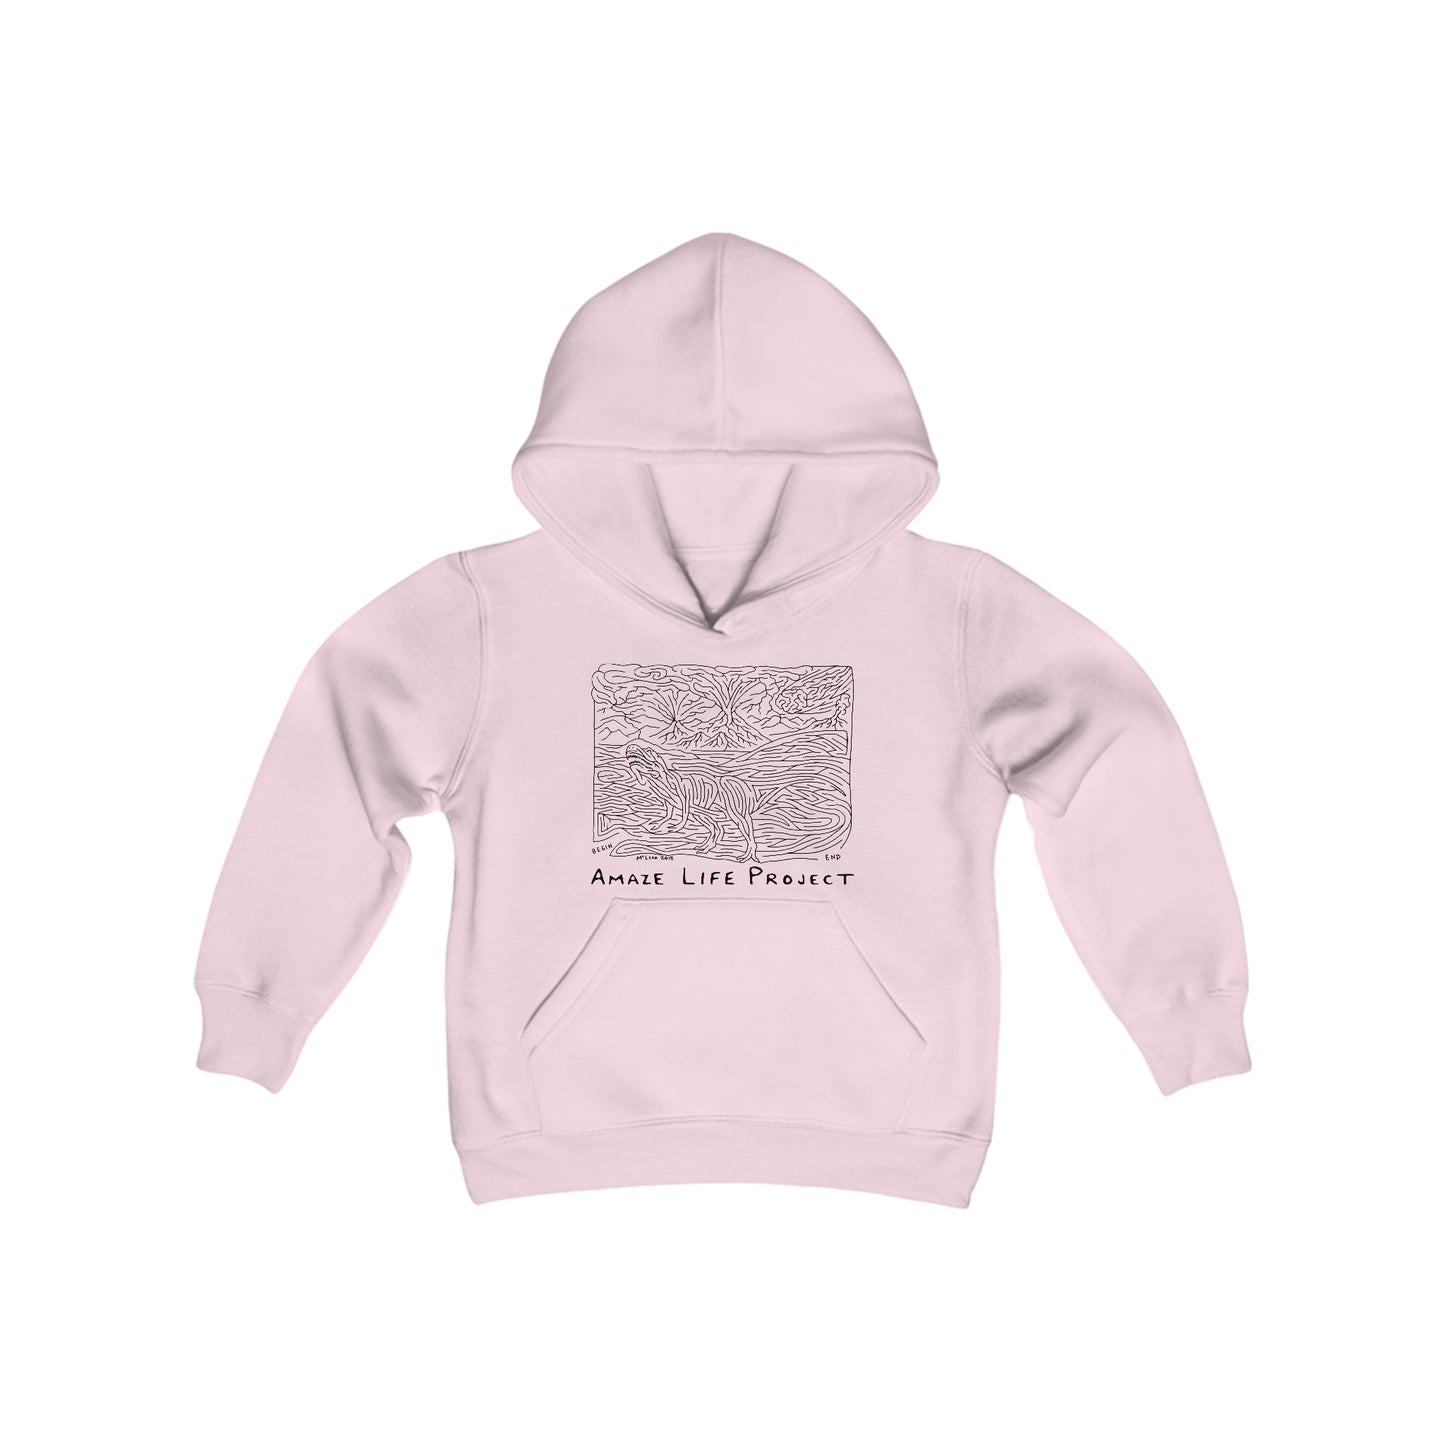 T-Rex Apocalypse Youth Hoodie